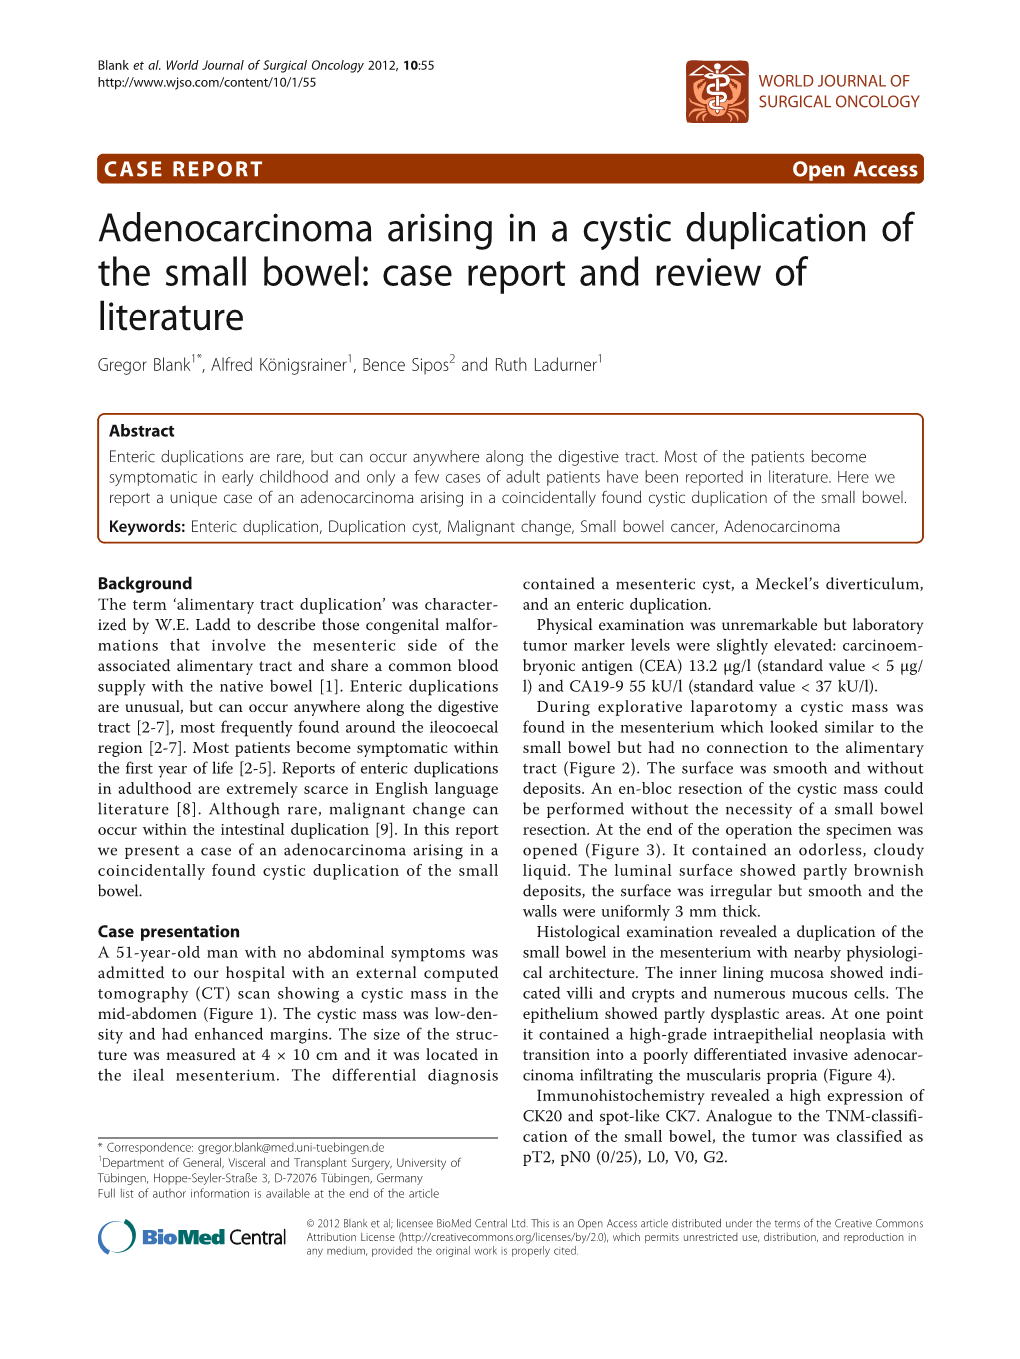 Adenocarcinoma Arising in a Cystic Duplication of the Small Bowel